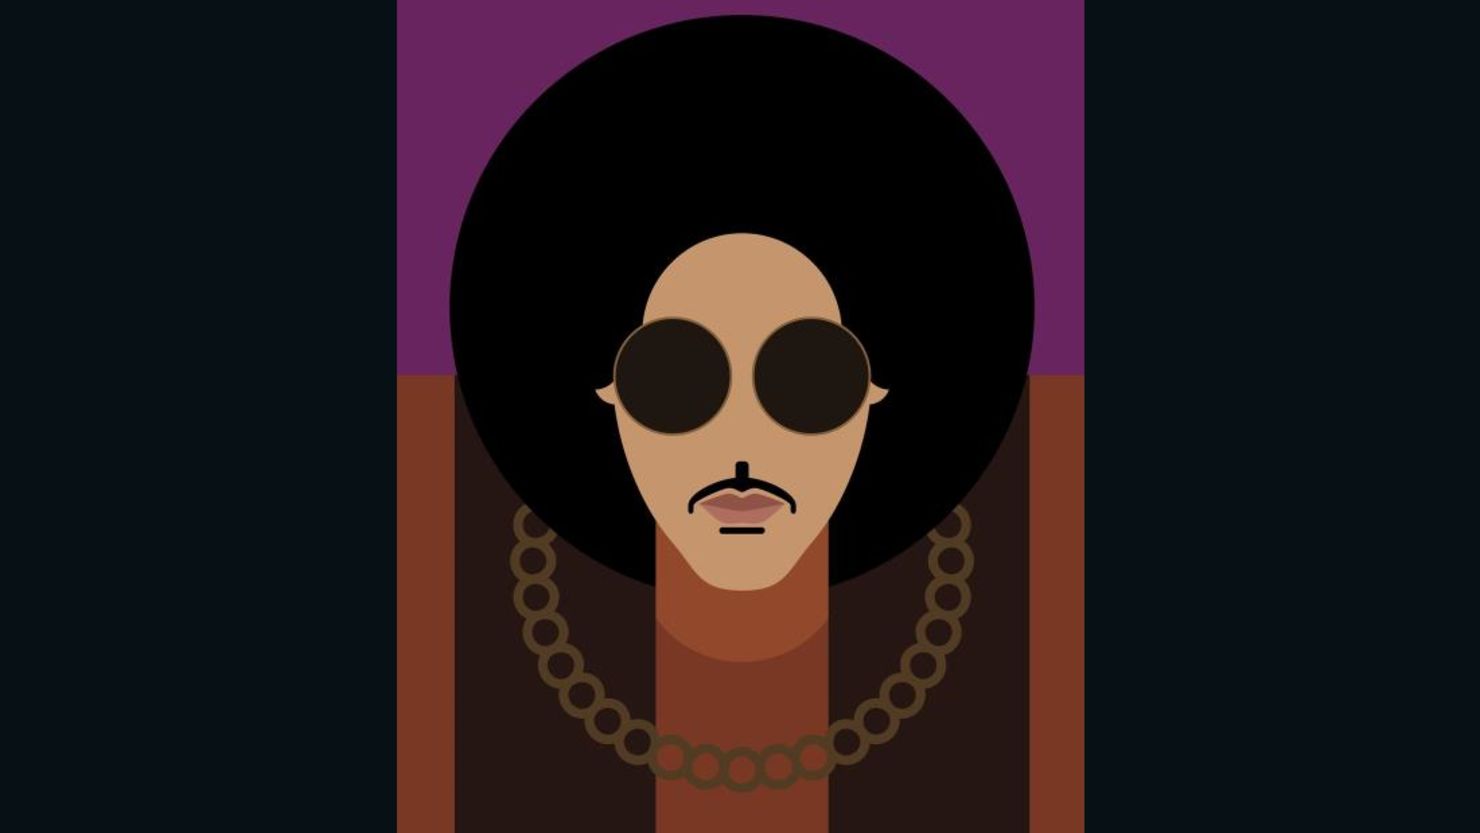 Singer-songwriter Prince records ode to Baltimore in the wake of Freddie Gray protests.